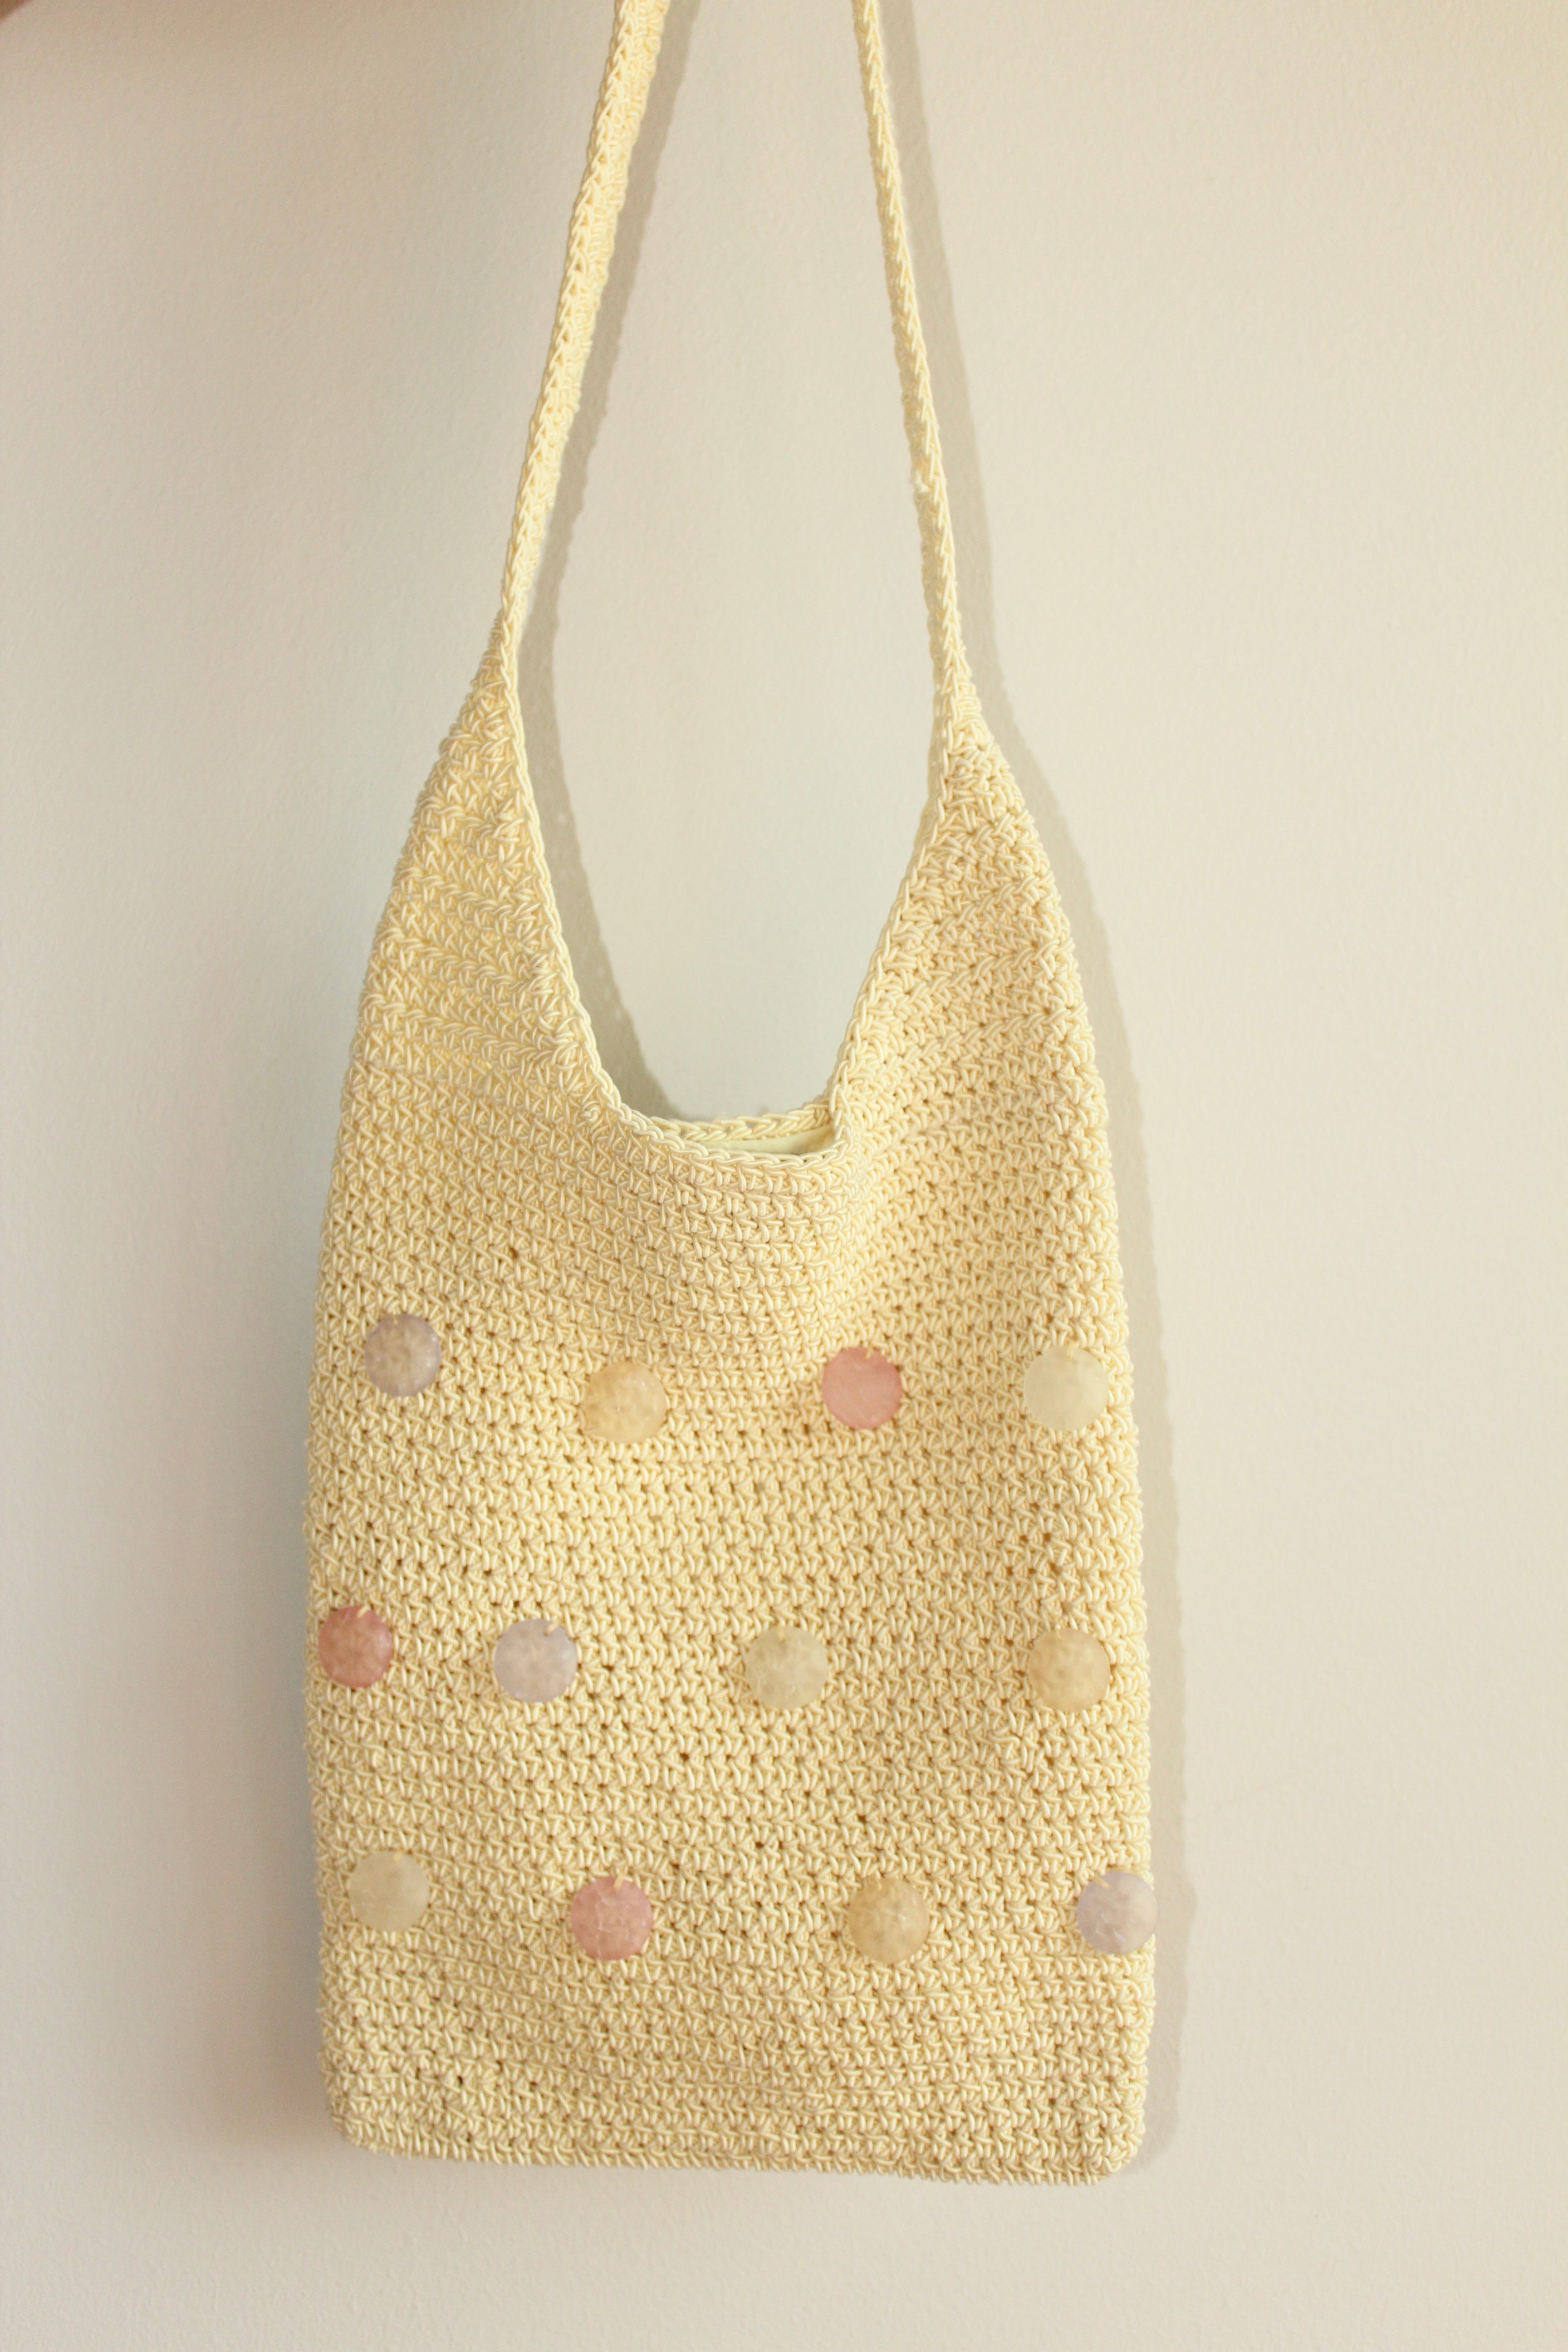 Vintage 90s Beaded Knit Tote